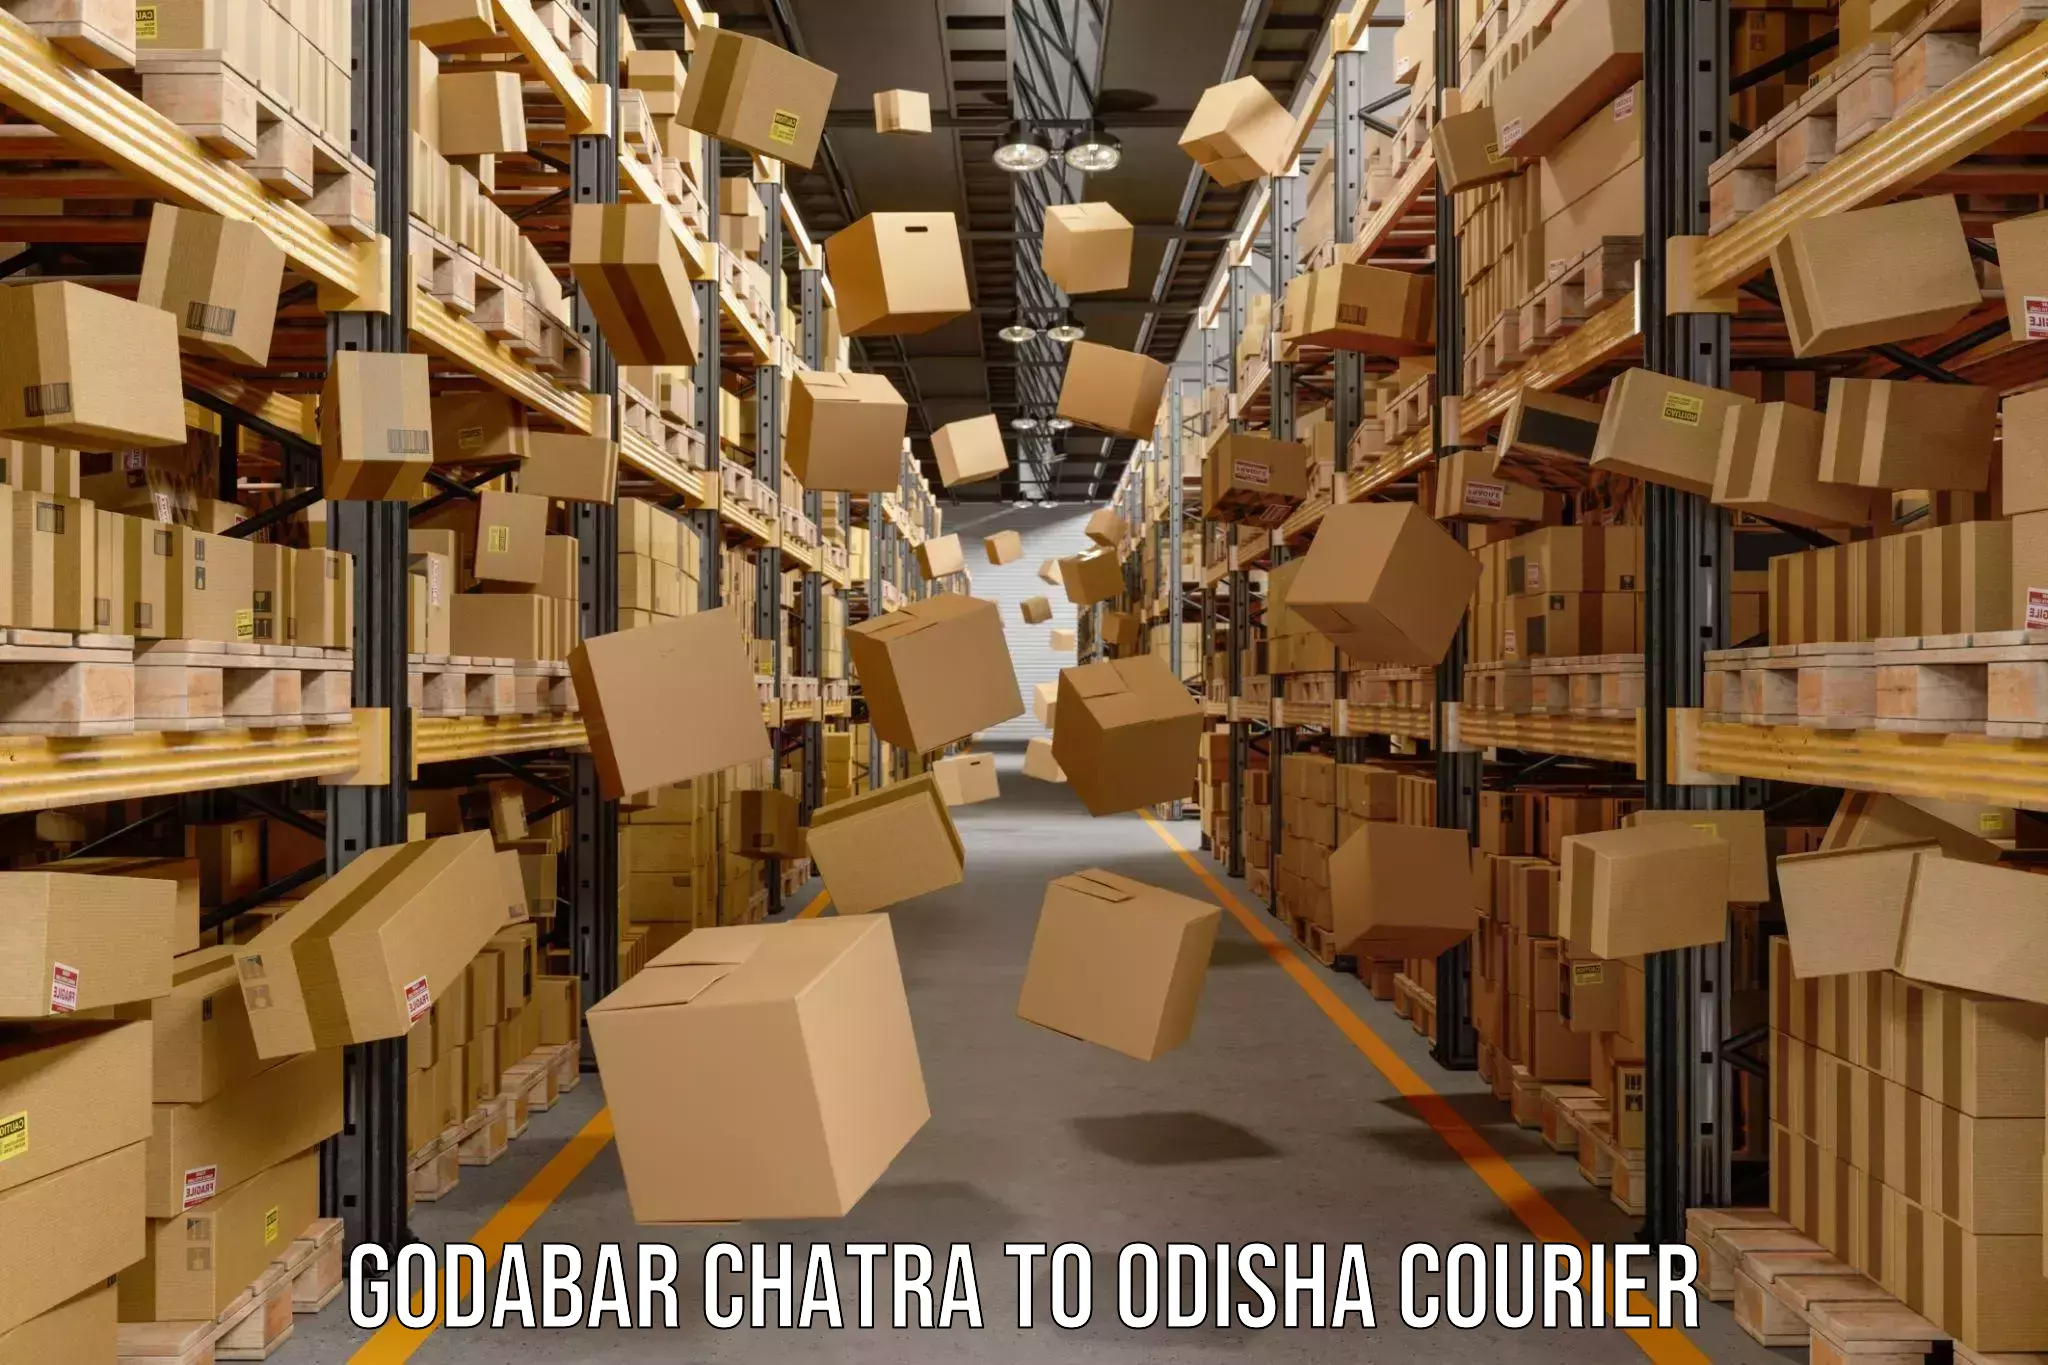 Quick booking process in Godabar Chatra to Asika